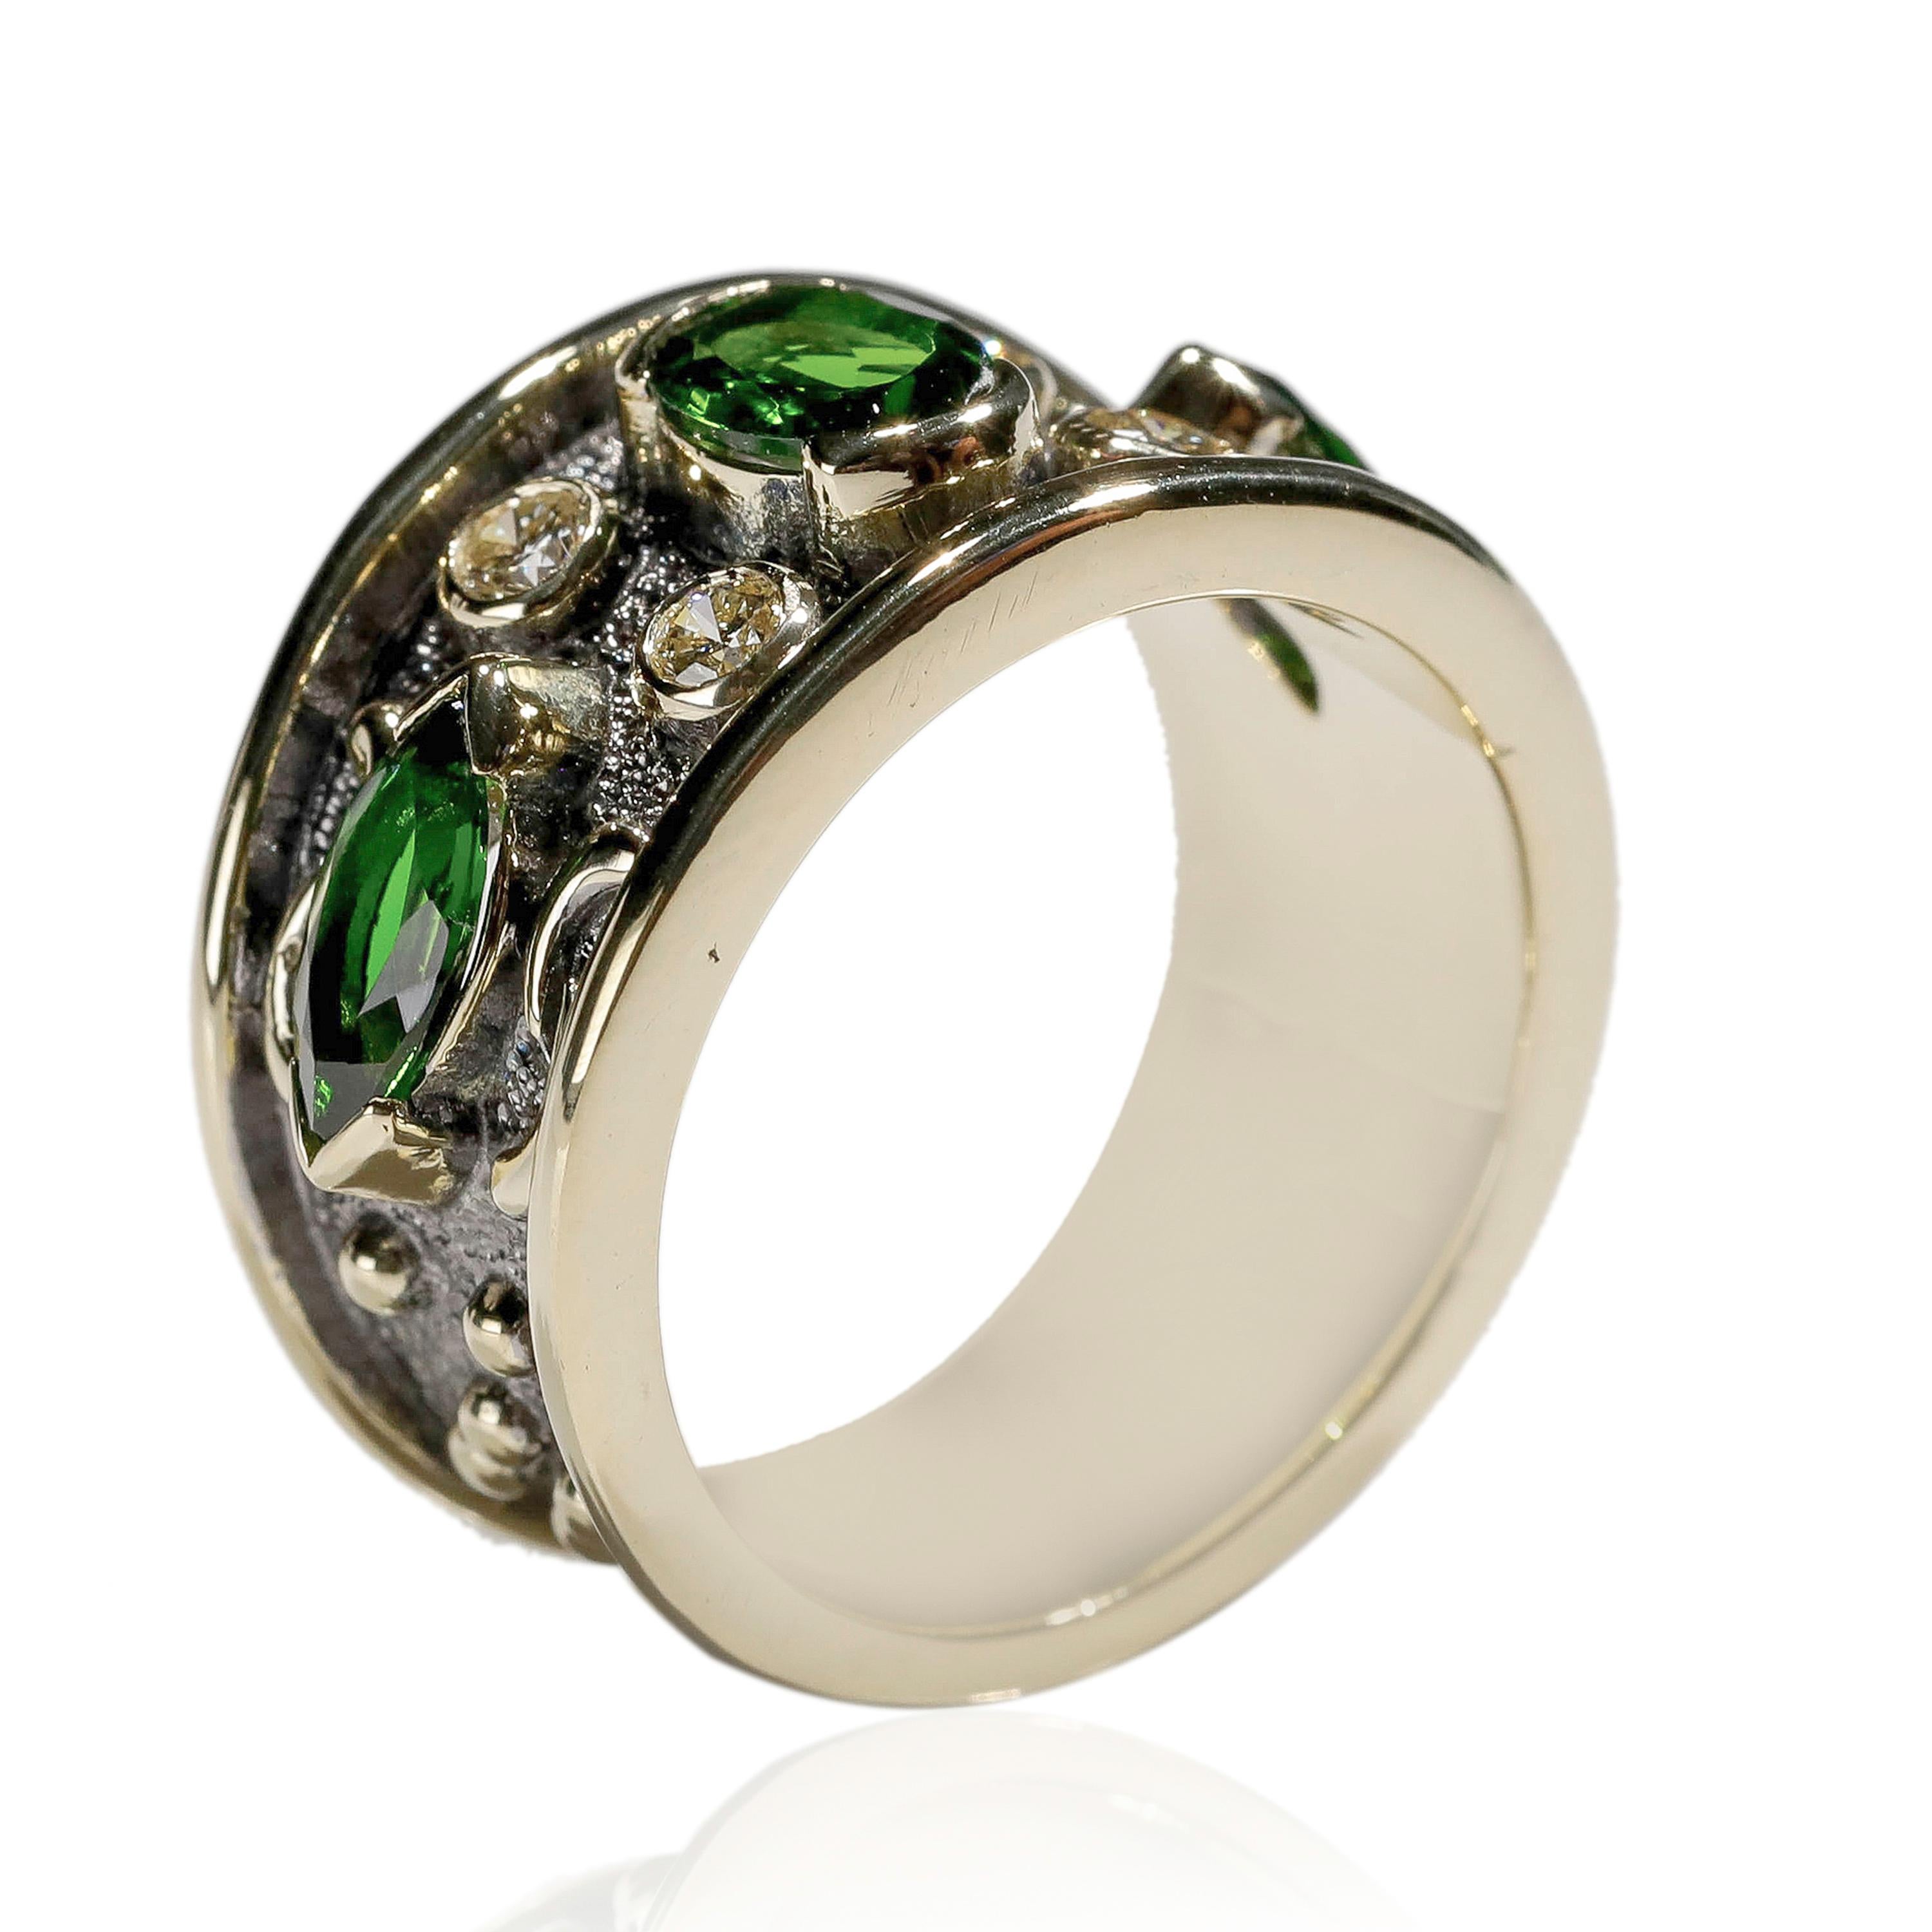 Round Cut 2.5 Carat Chrome Diopside Tourmaline and Diamond Band Ring US Size 6 For Sale